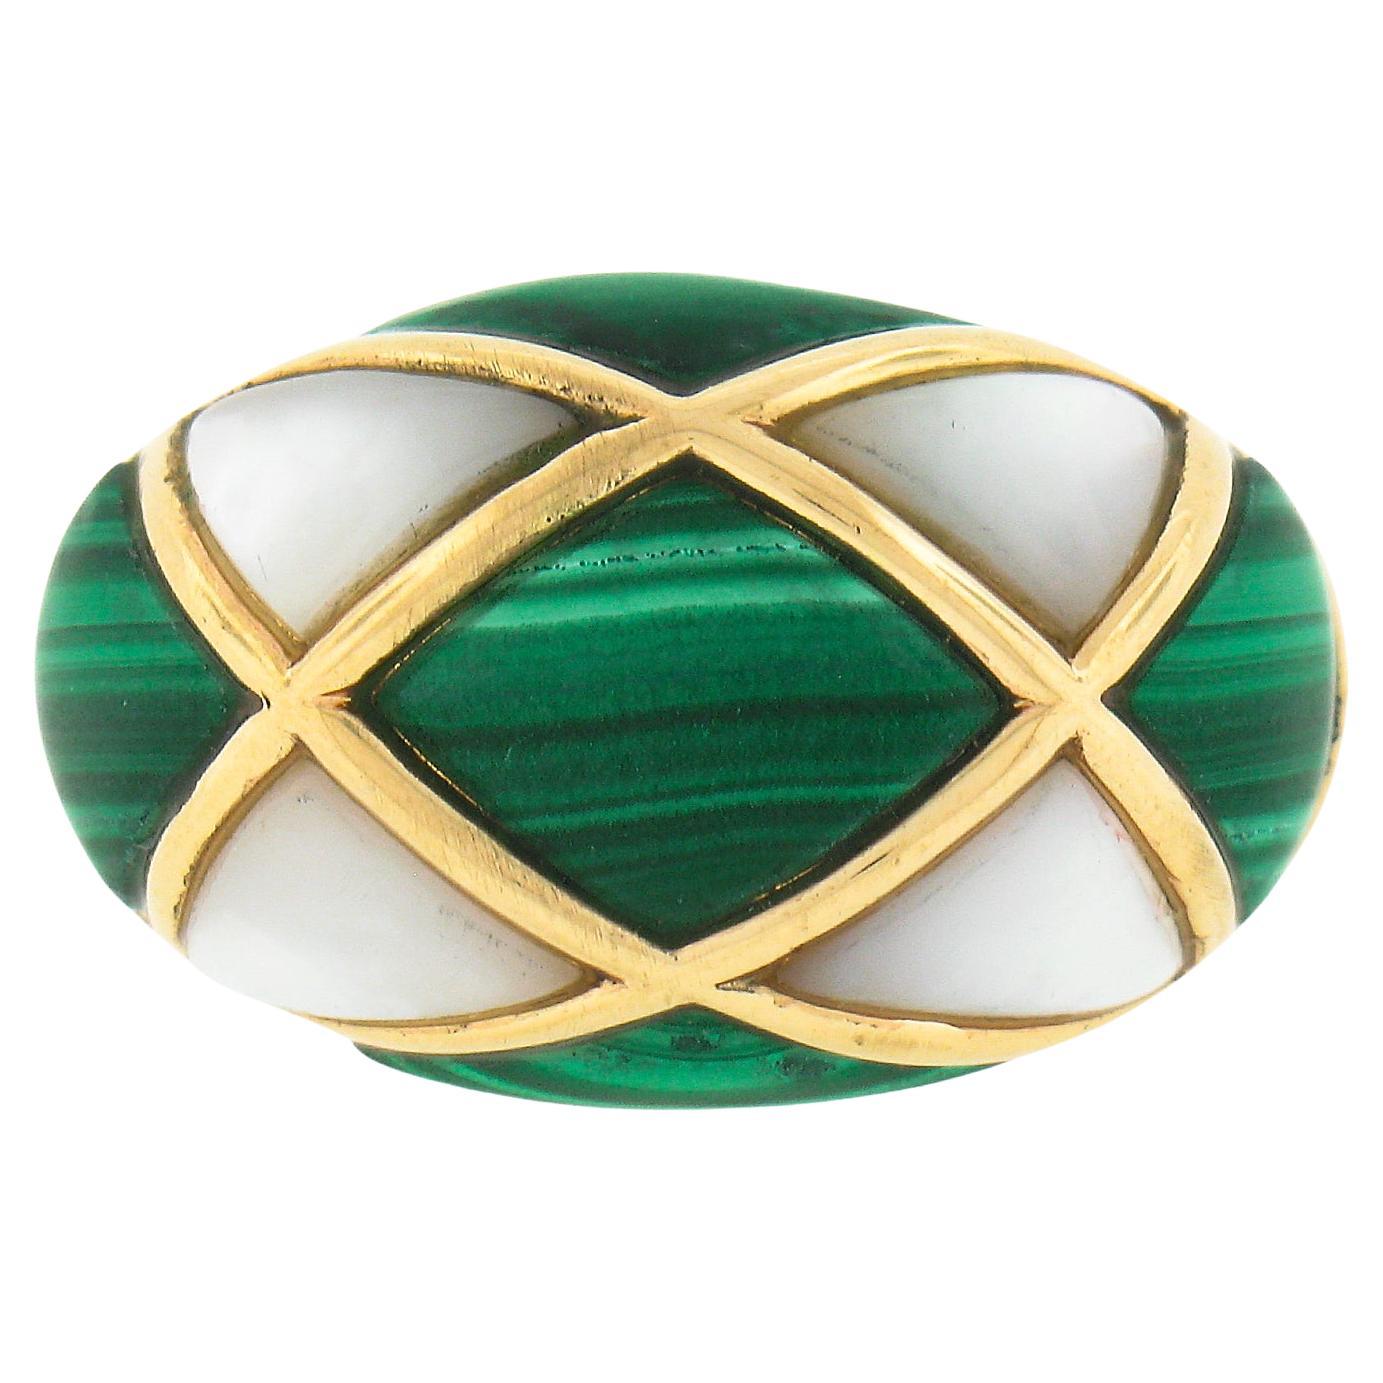 Vintage 14K Yellow Gold Inlaid Malachite & Mother of Pearl Wide Domed Bombe Ring